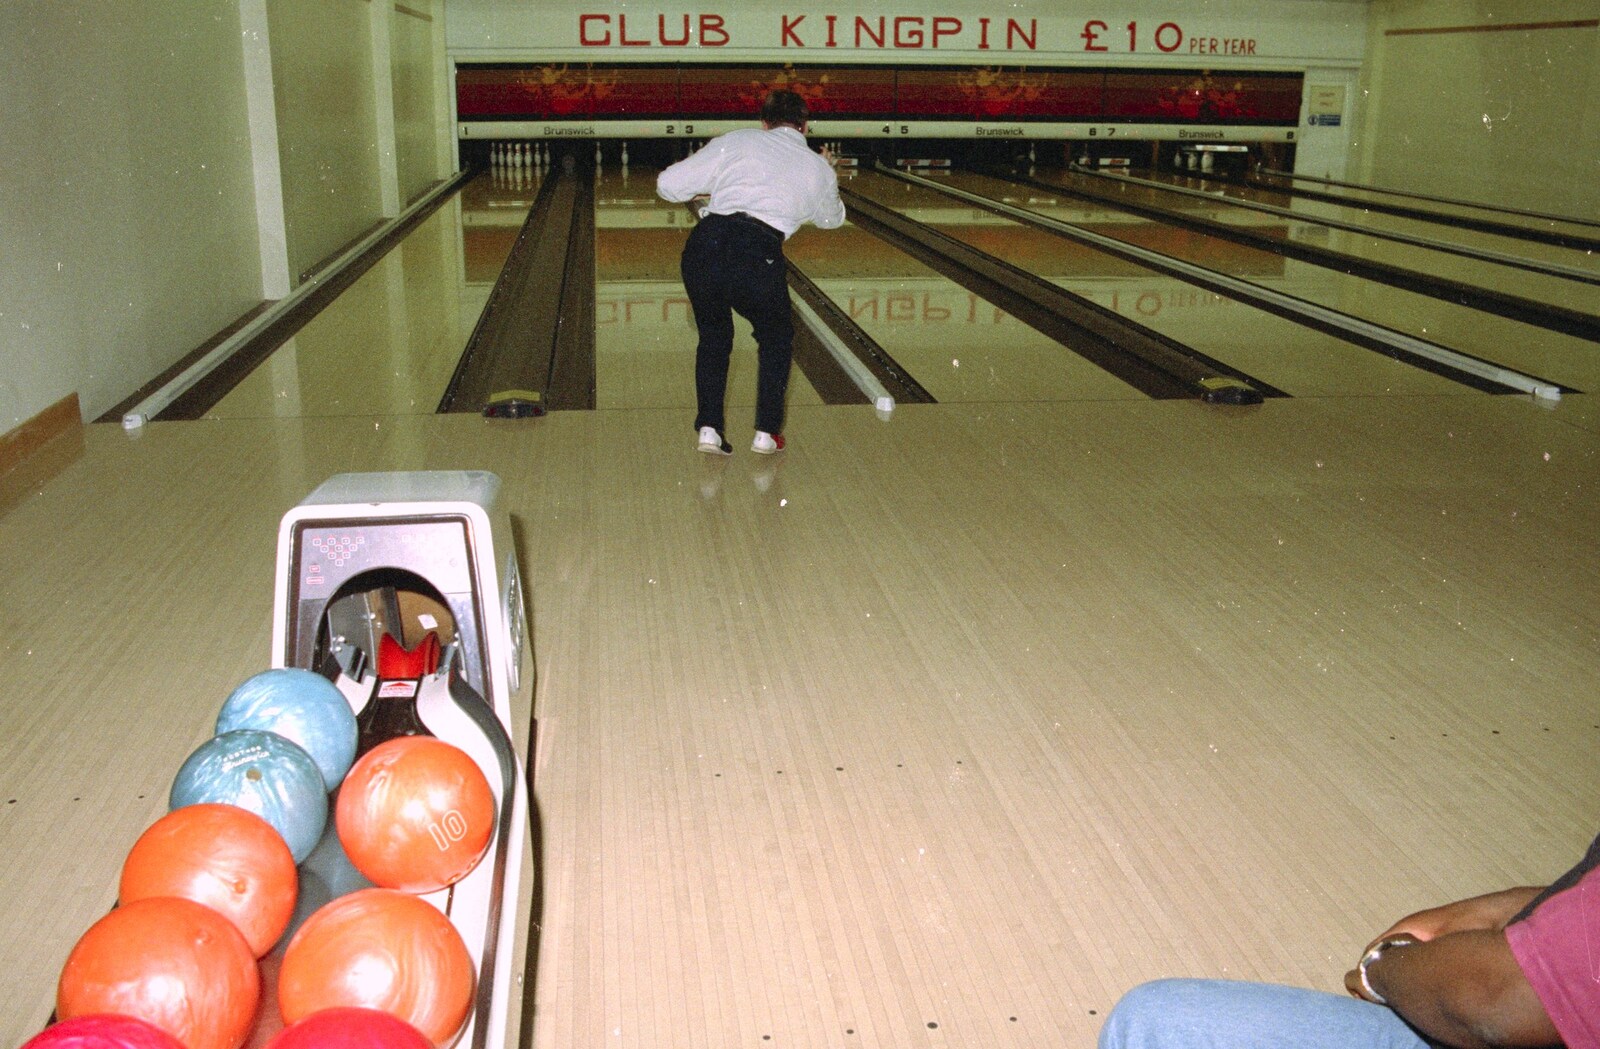 Campbell hurls one down the lane from Dougie's Birthday and Adrian Leaves CISU, Ipswich, Suffolk - 29th June 1997